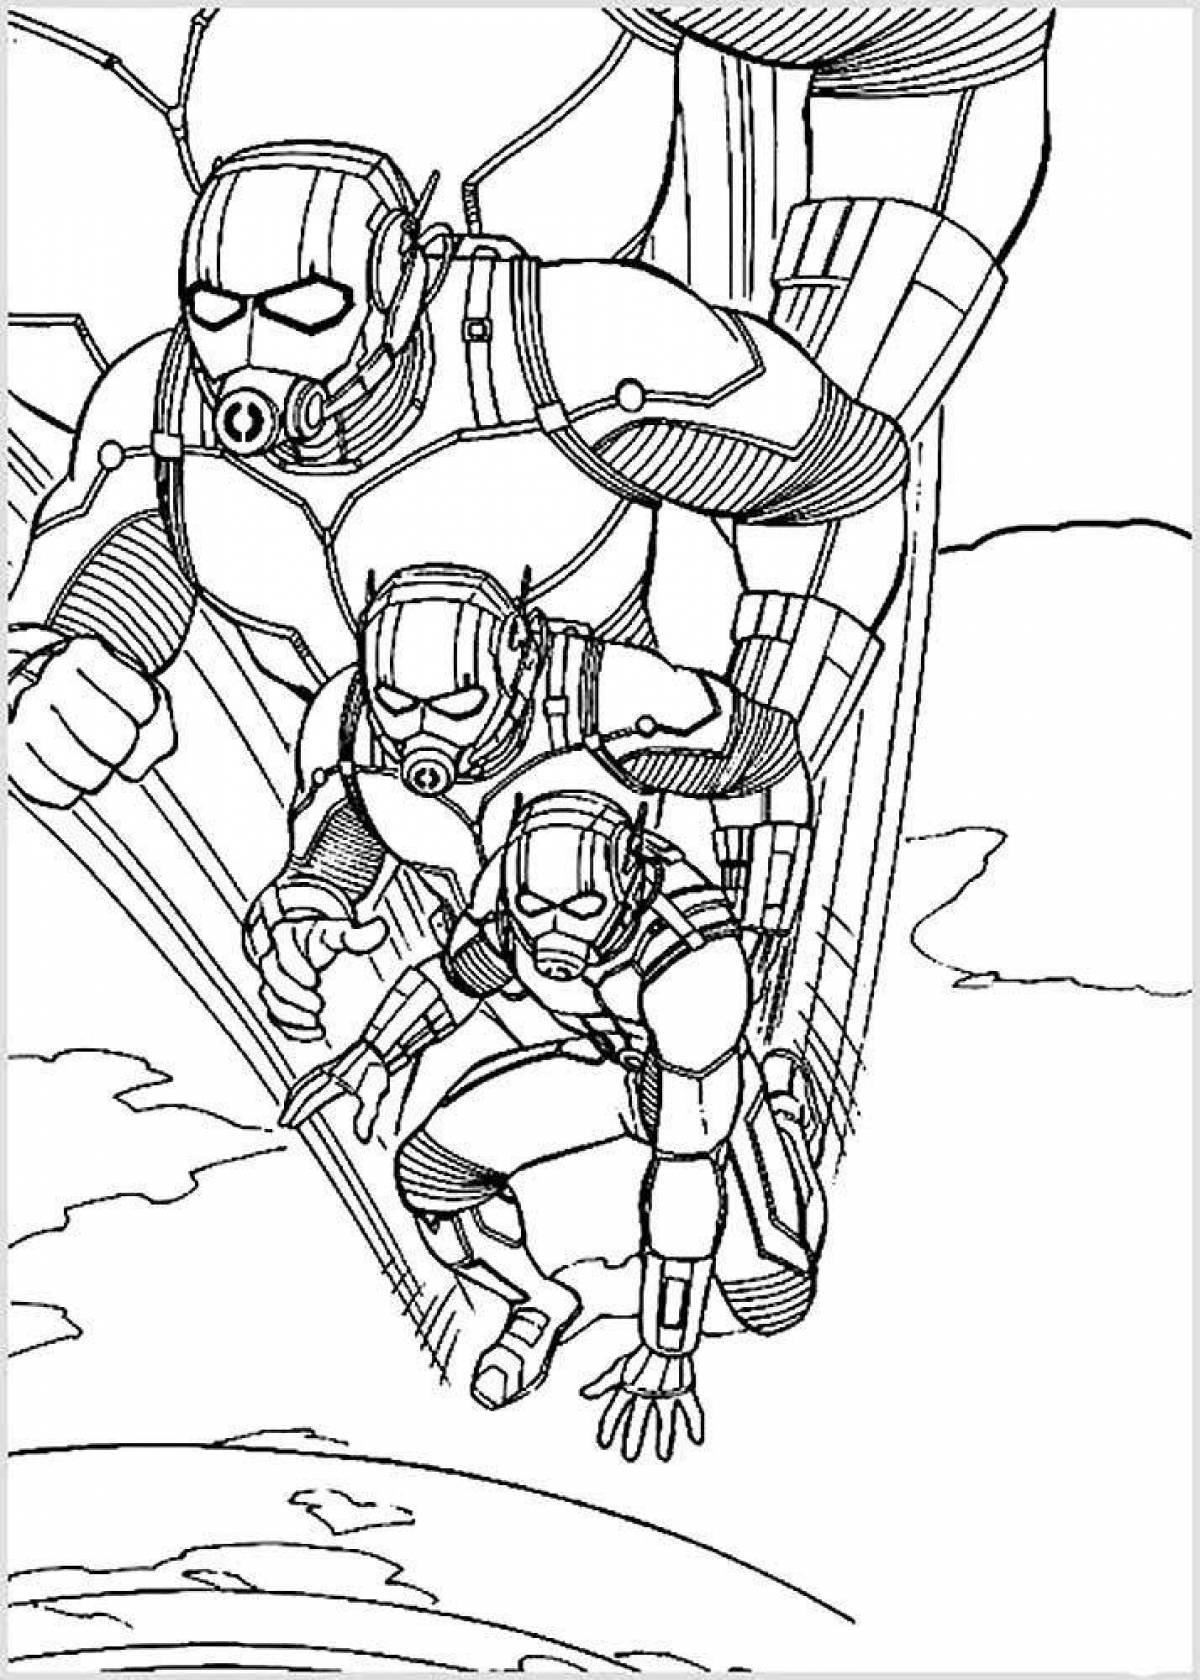 Adorable Ant-Man coloring book